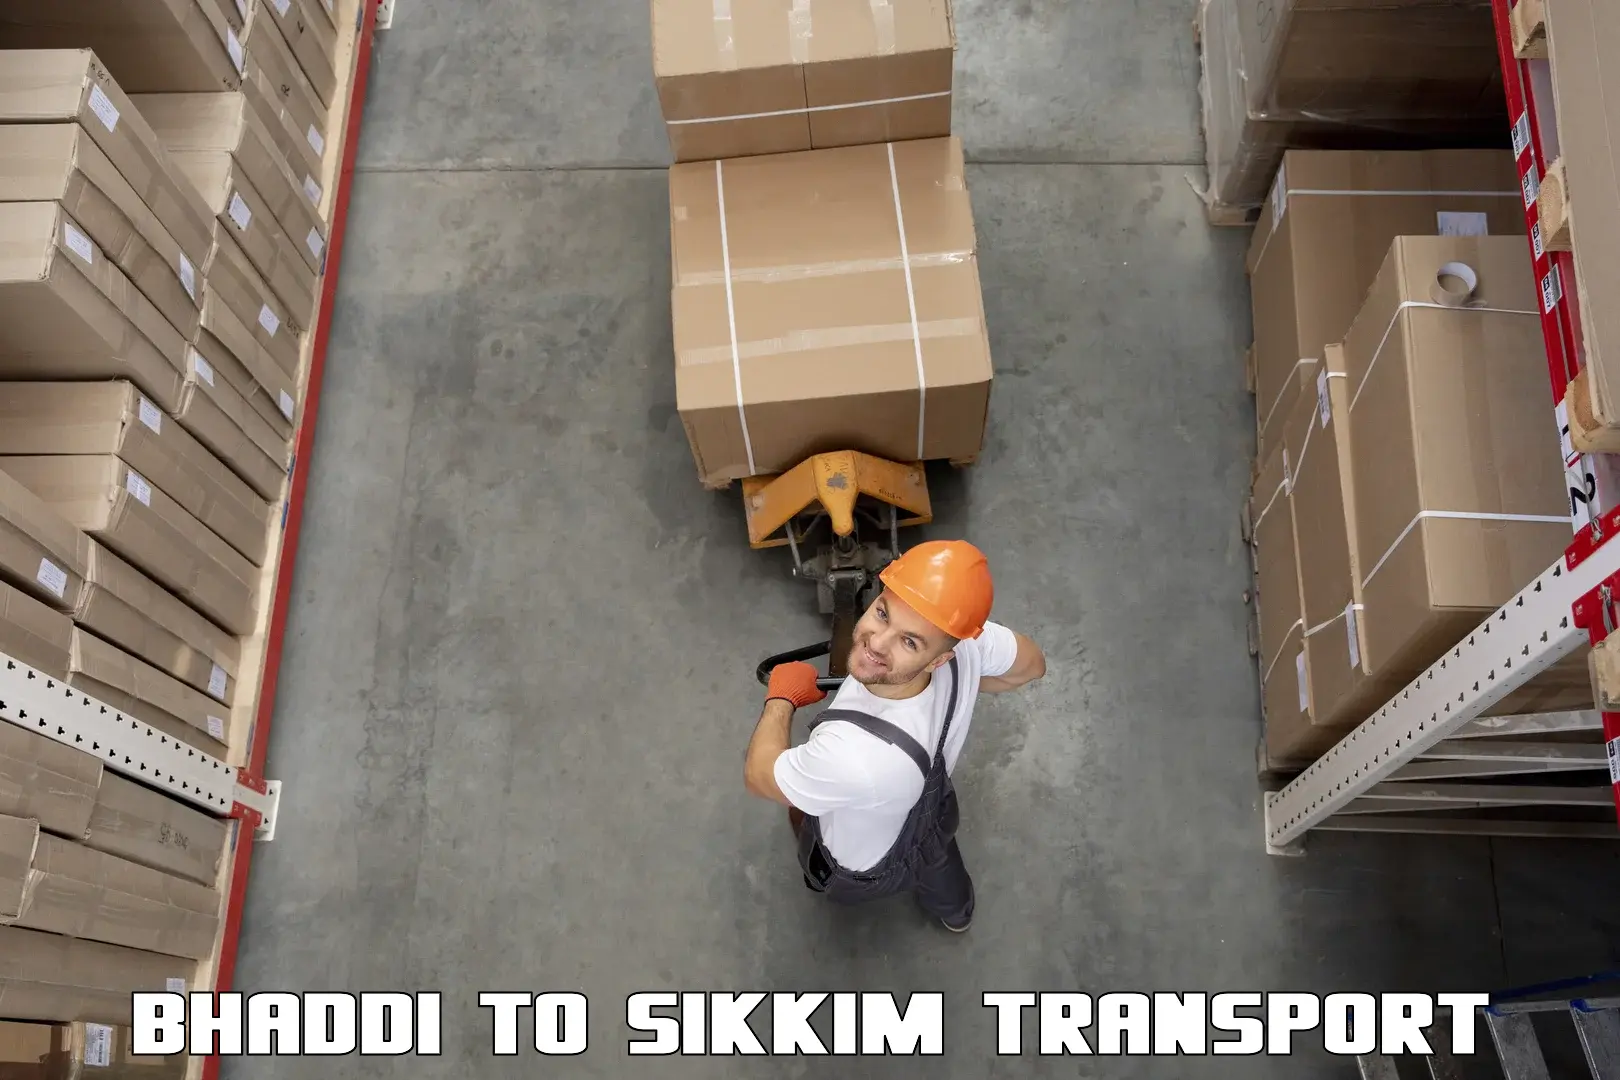 Commercial transport service Bhaddi to West Sikkim